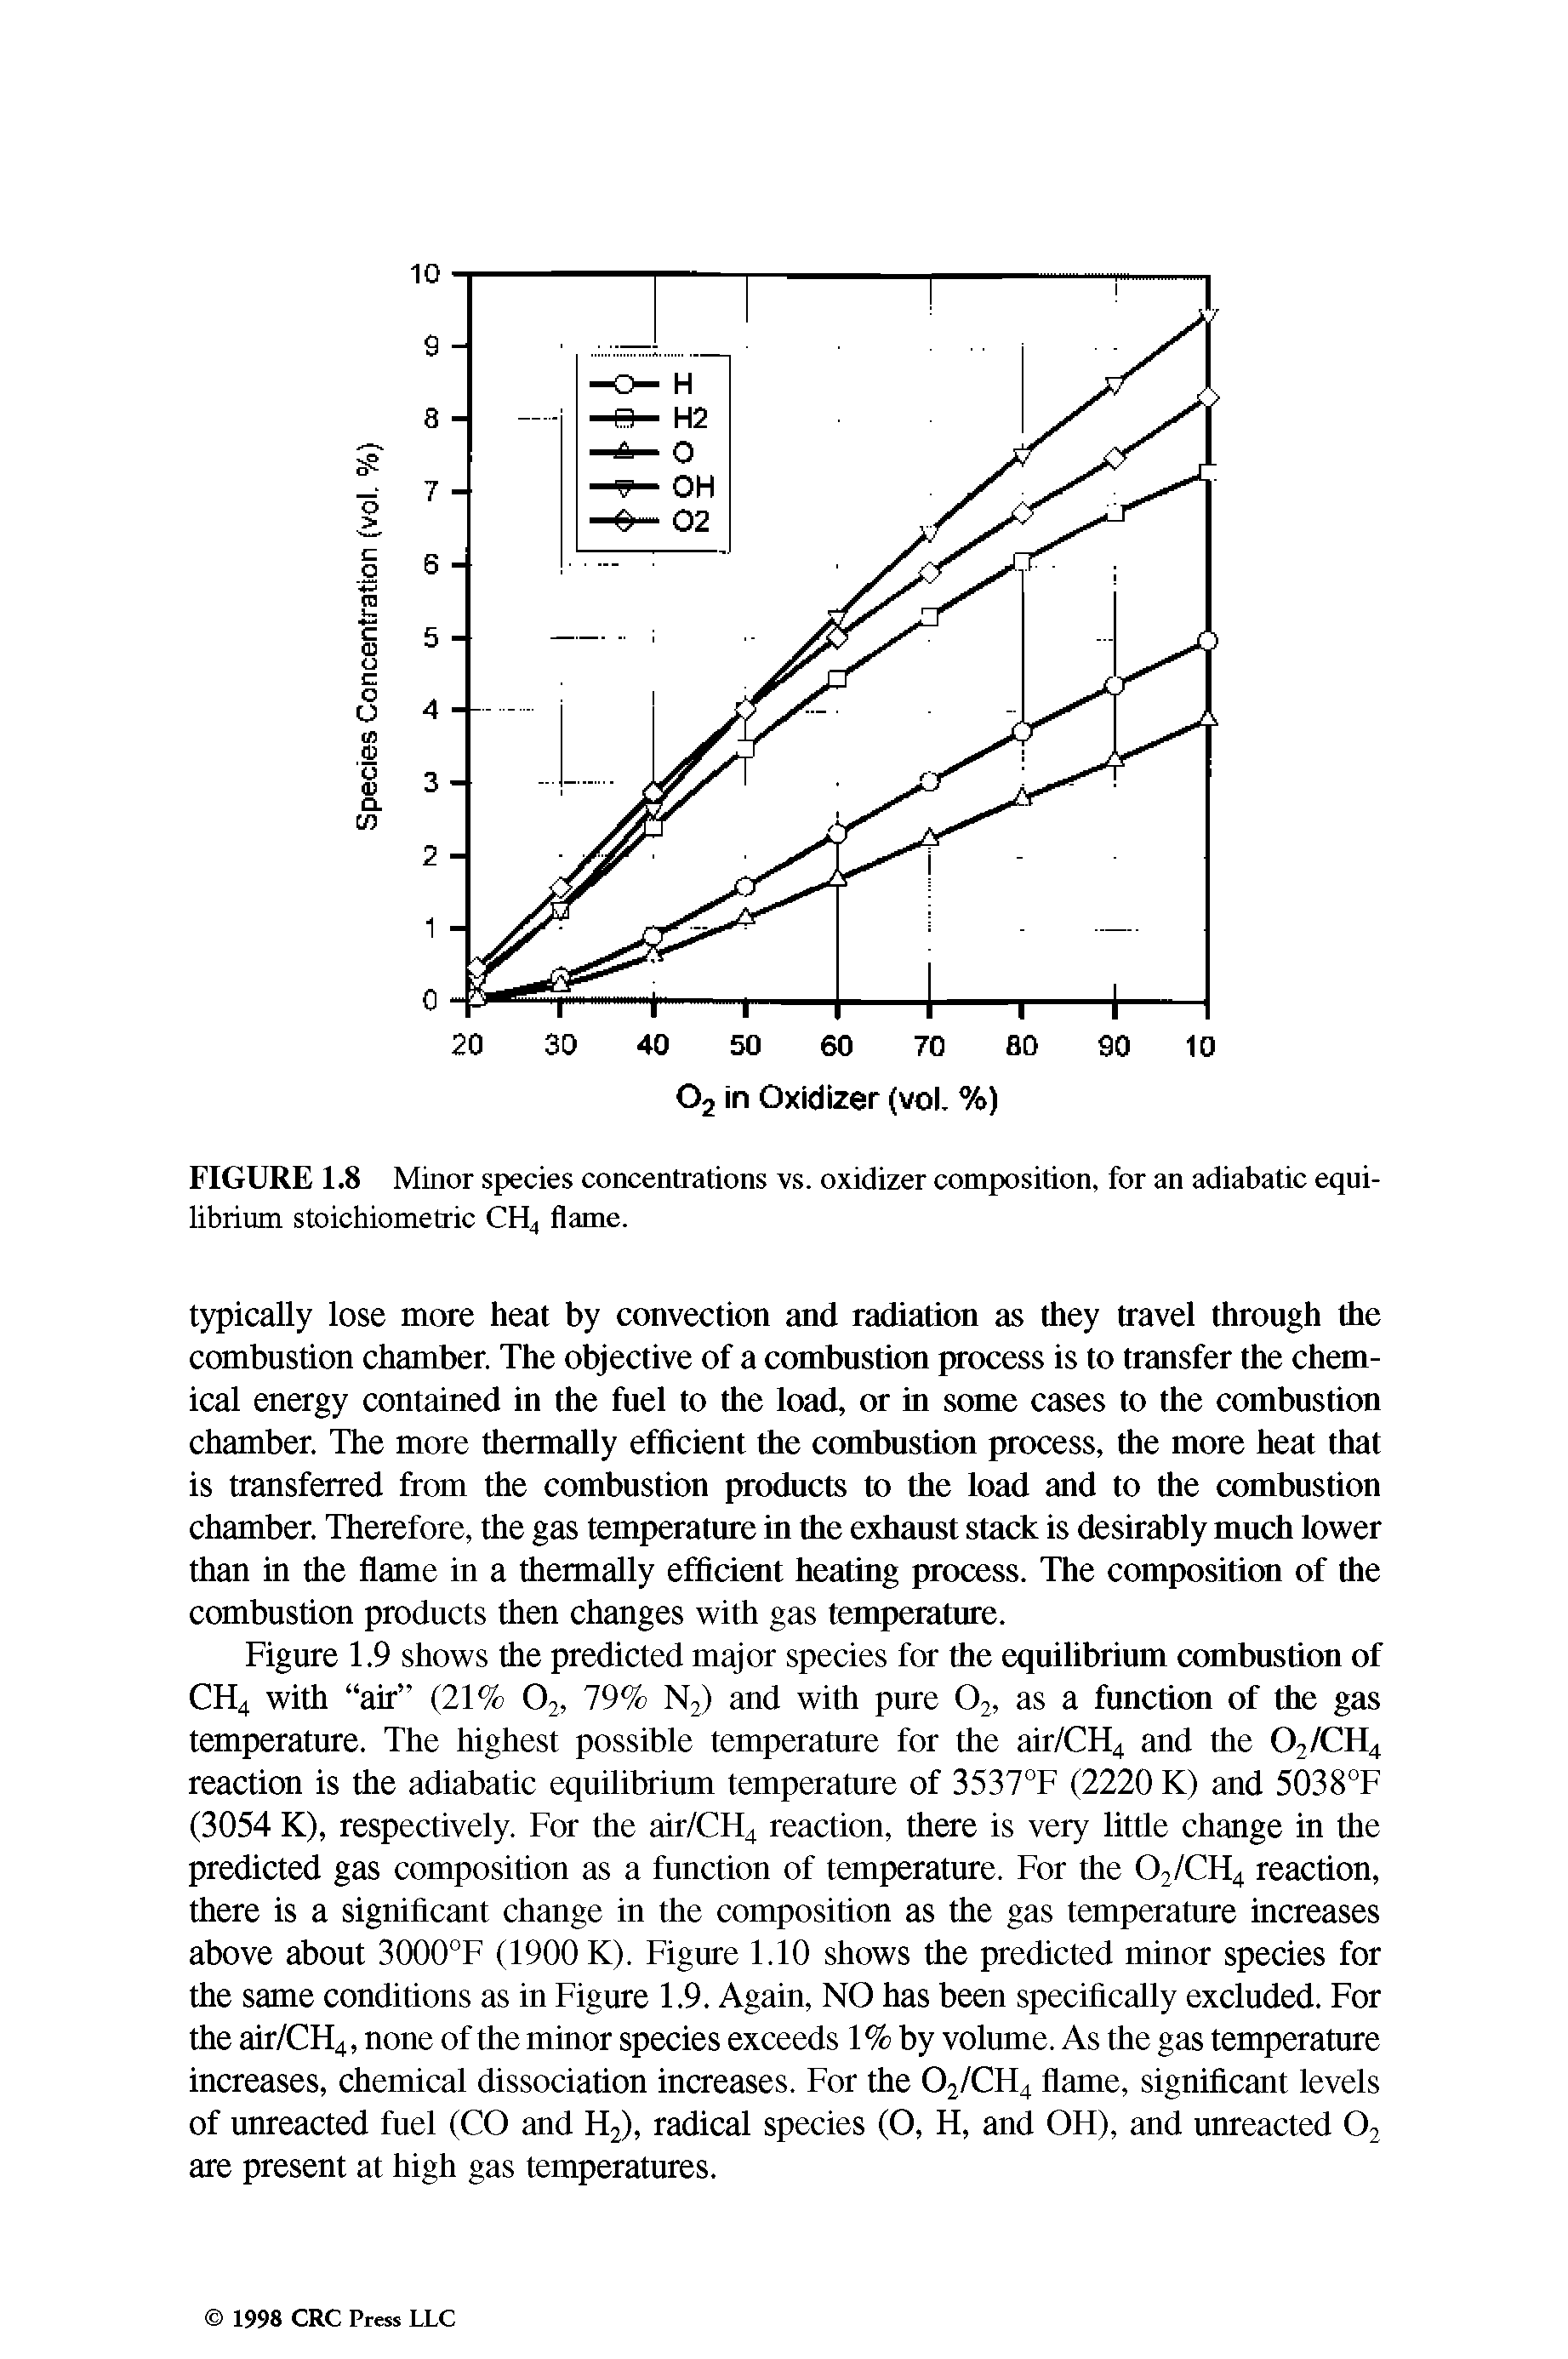 Figure 1.9 shows the predicted major species for the equilibrium combustion of CH4 with air (21% 02, 79% N2) and with pure 02, as a function of the gas temperature. The highest possible temperature for the air/CH4 and the 02/CH4 reaction is the adiabatic equilibrium temperature of 3537°F (2220 K) and 5038°F (3054 K), respectively. For the air/CH4 reaction, there is very little change in the predicted gas composition as a function of temperature. For the 02/CH4 reaction, there is a significant change in the composition as the gas temperature increases above about 3000°F (1900 K). Figure 1.10 shows the predicted minor species for the same conditions as in Figure 1.9. Again, NO has been specifically excluded. For the air/CH4, none of the minor species exceeds 1% by volume. As the gas temperature increases, chemical dissociation increases. For the 02/CH4 flame, significant levels of unreacted fuel (CO and H2), radical species (O, H, and OH), and unreacted 02 are present at high gas temperatures.